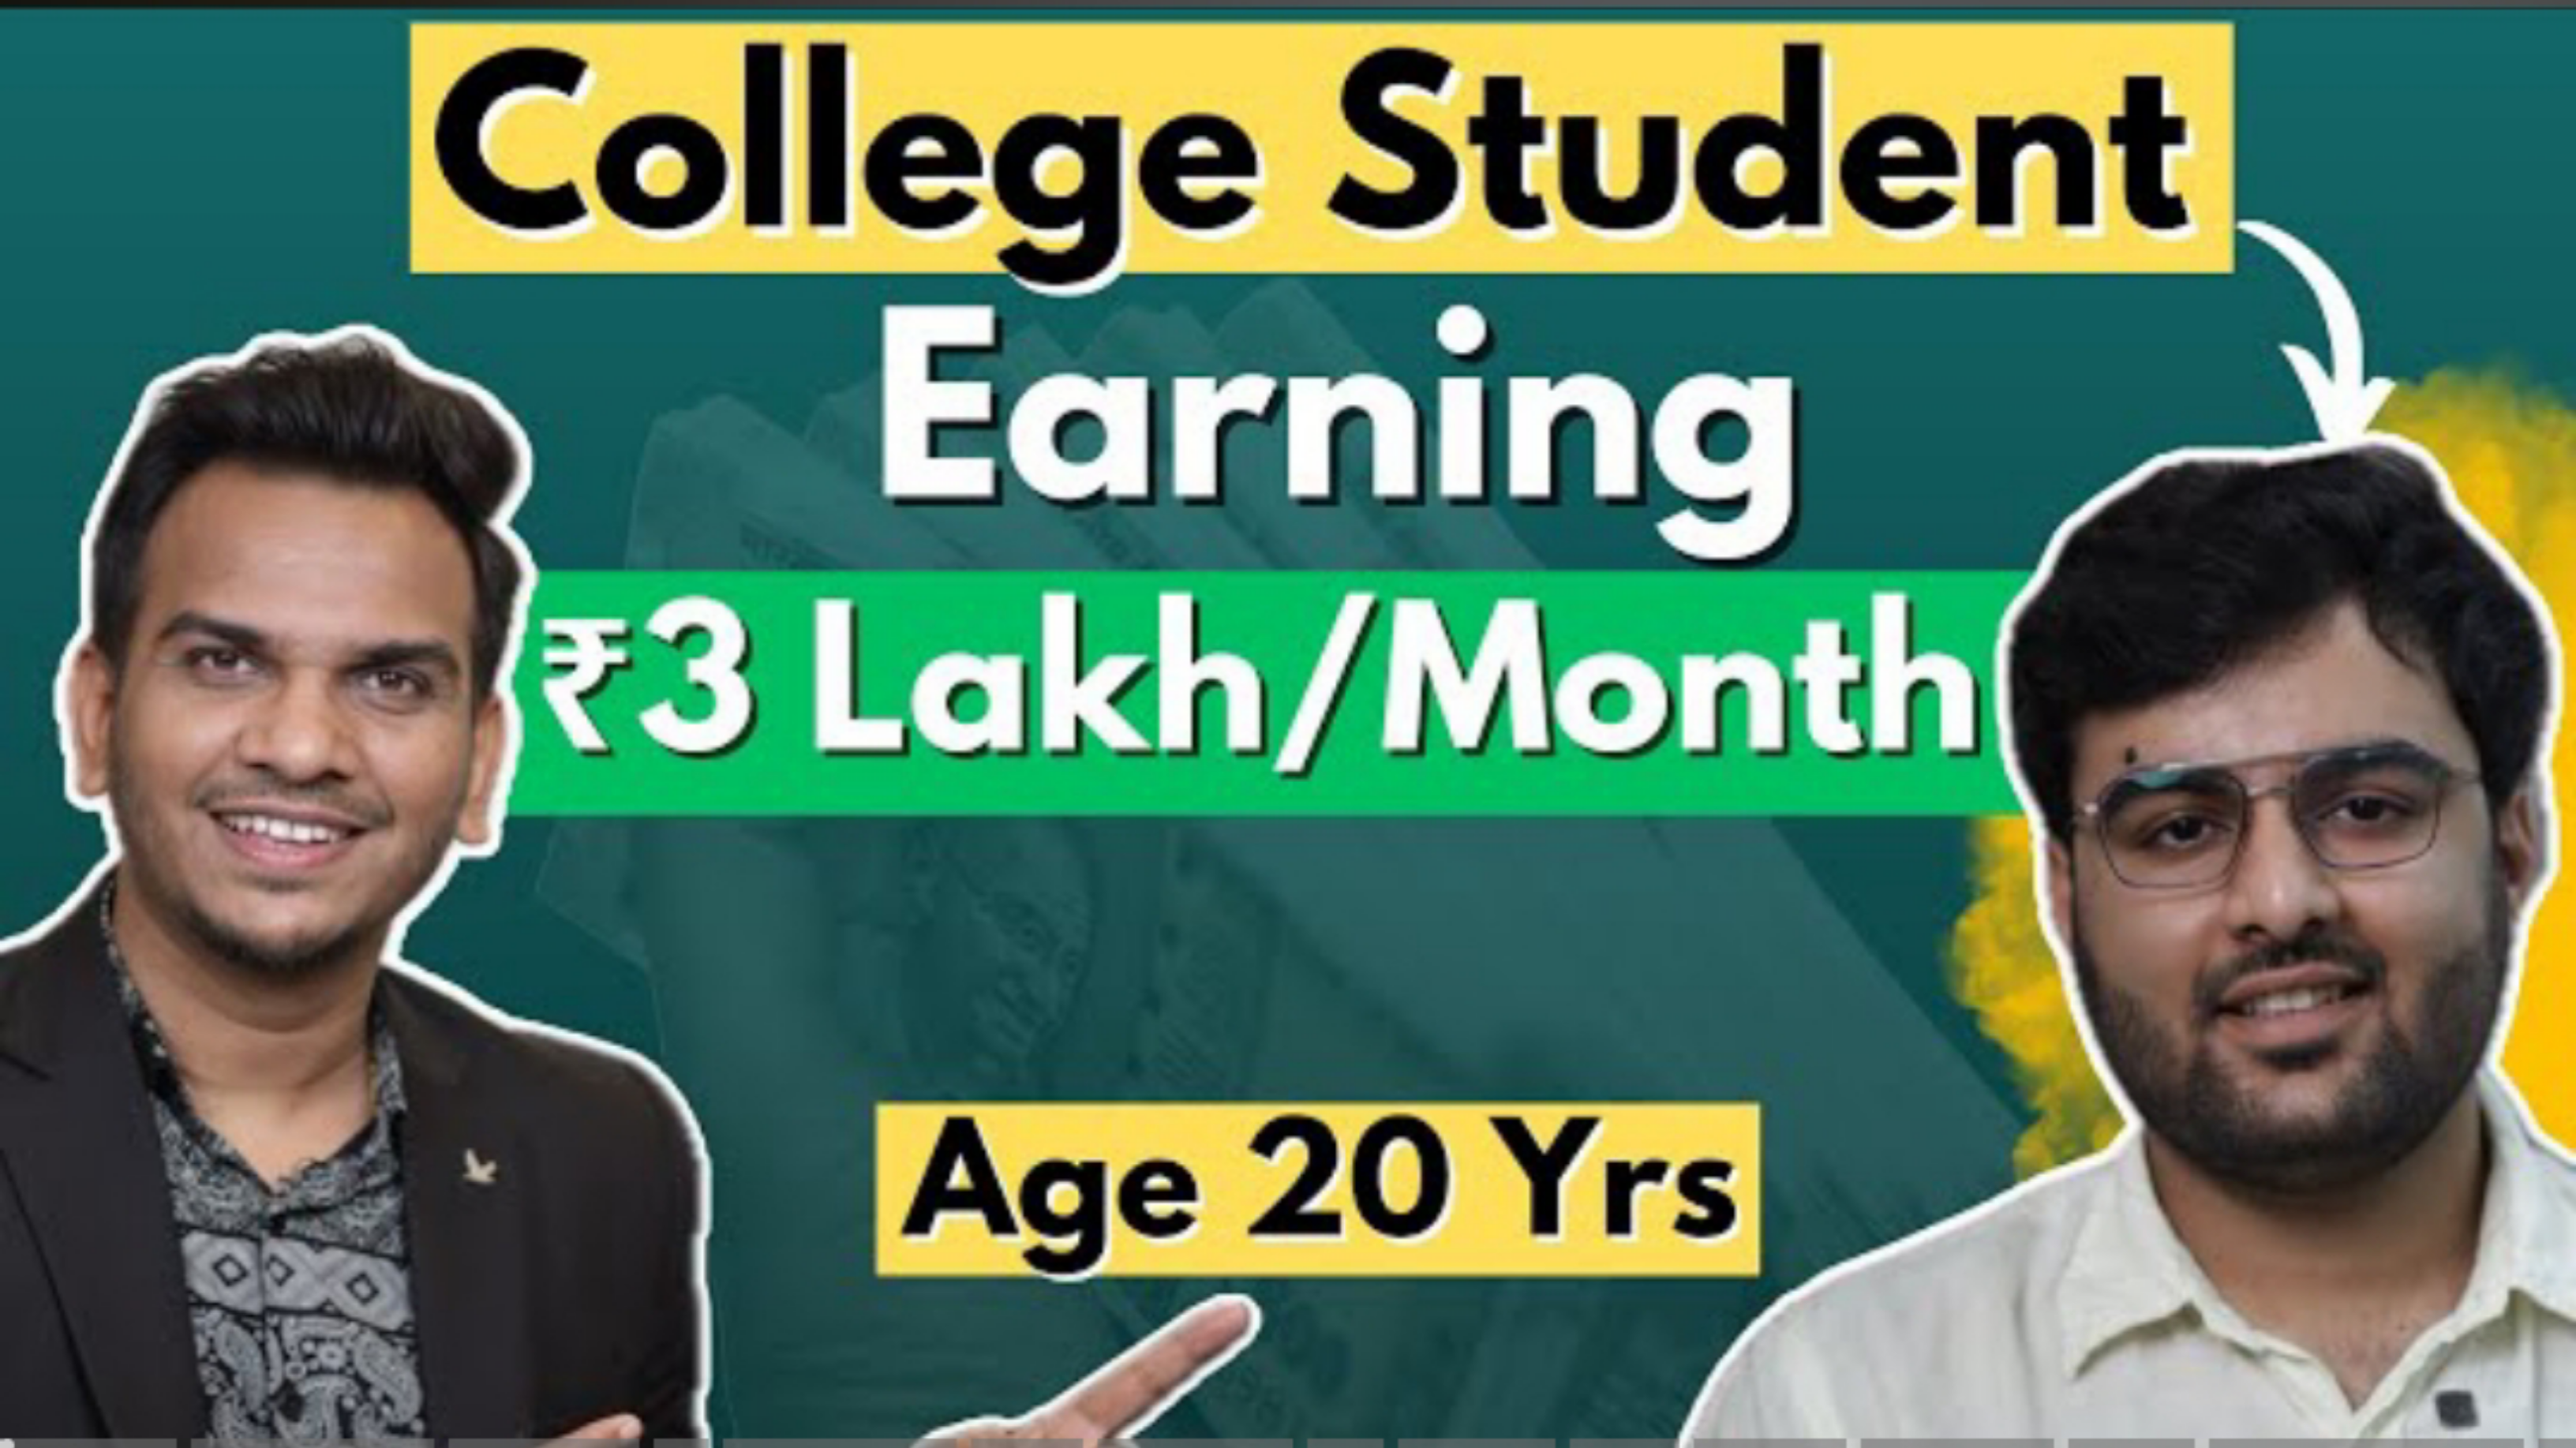 College Students Earn 3 Lakhs per Month in the Satish K video